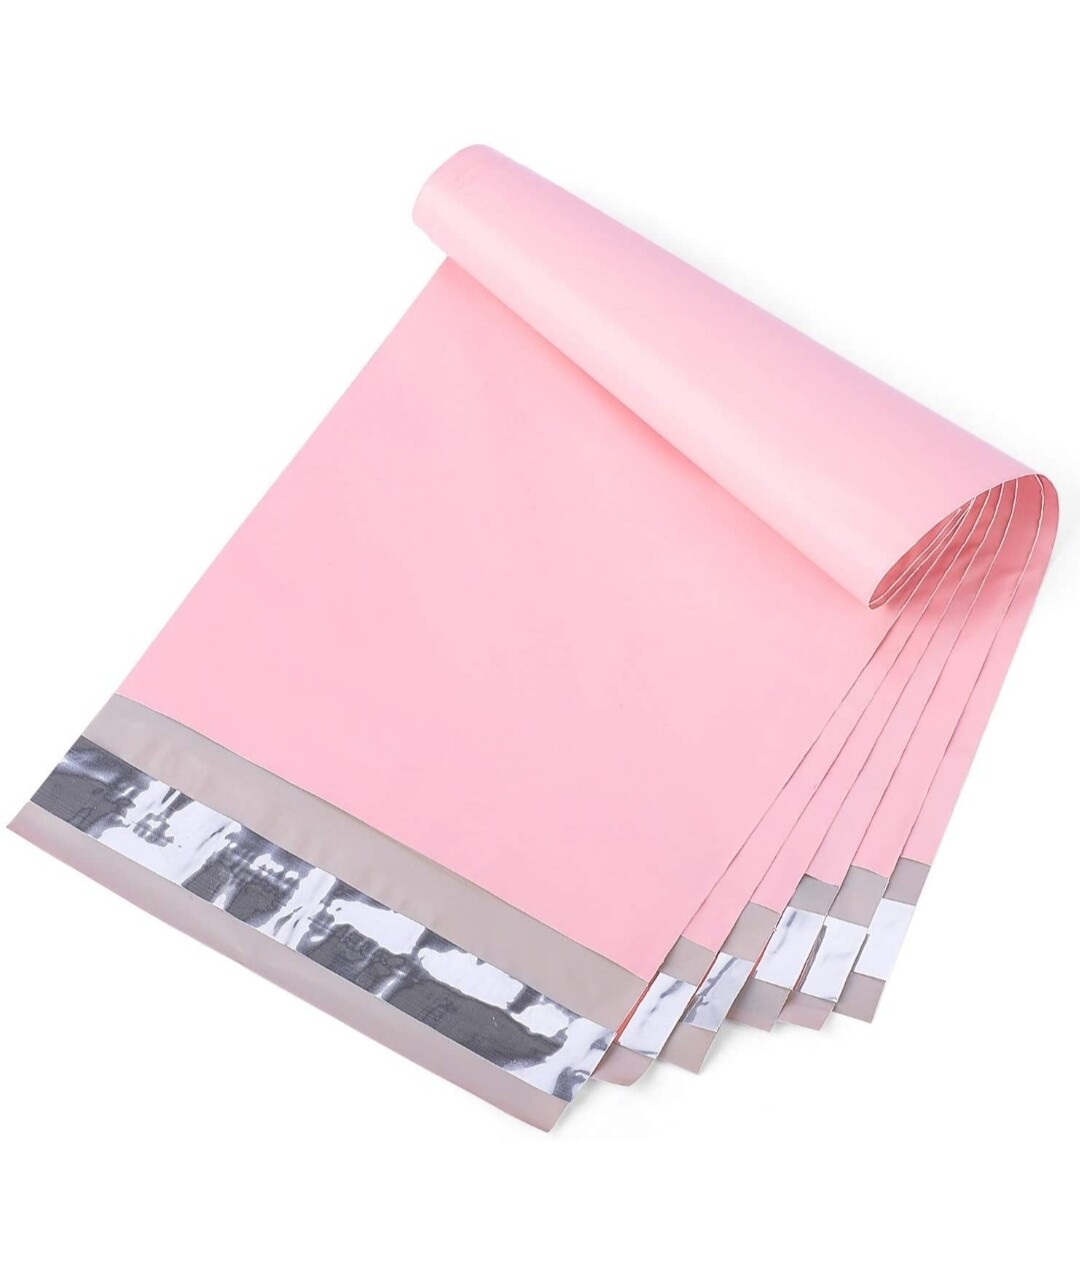 6×9 Polymailers (Light Pink), Quantity: 10